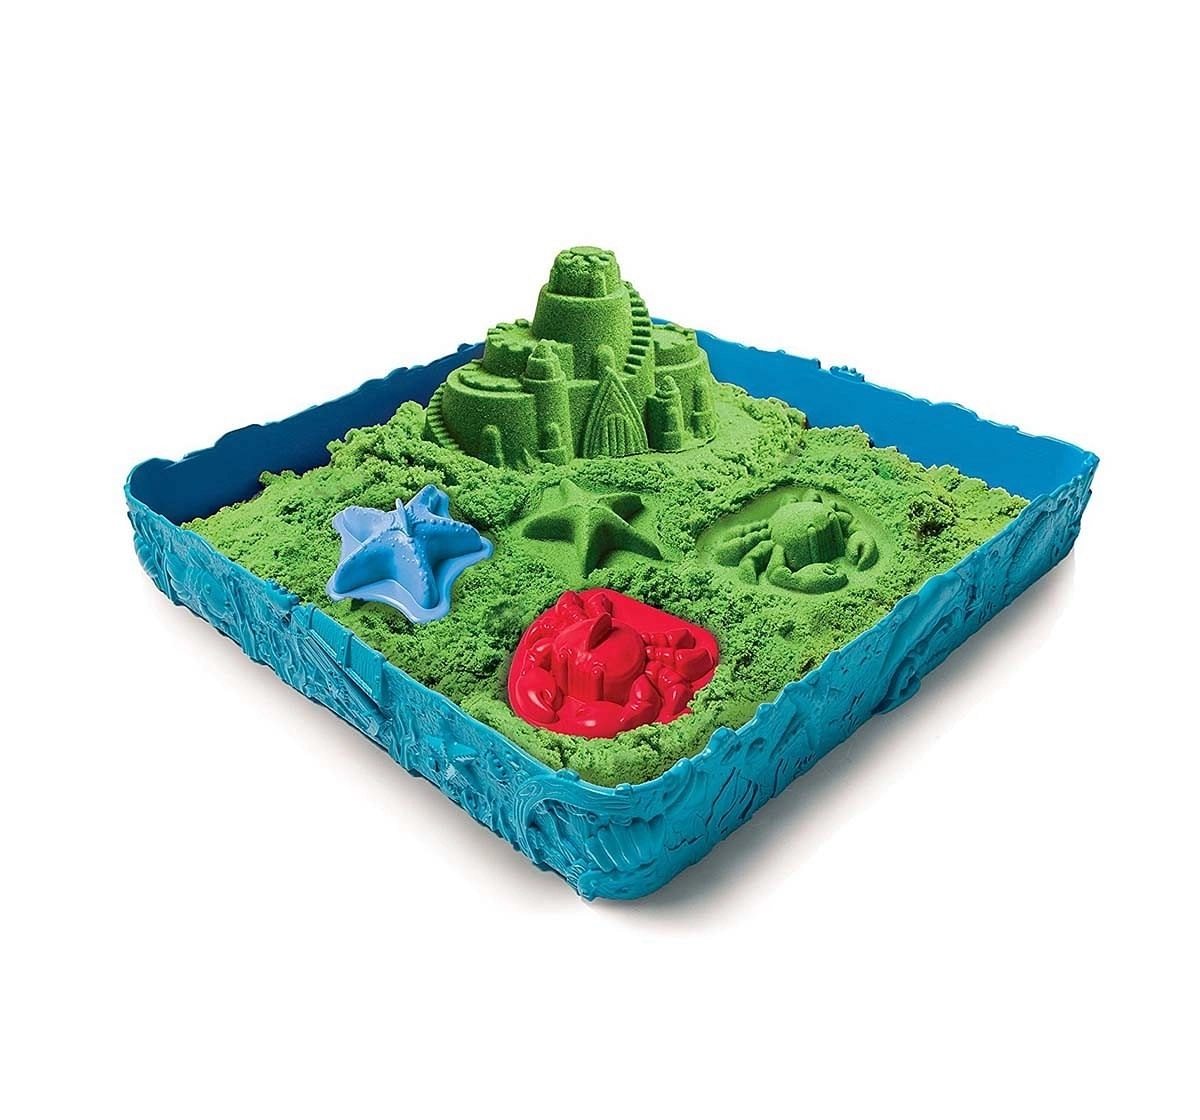 Kinetic Sand Box And Mold Set, Multi Color Sand, Slime & Others for Kids age 4Y+ 